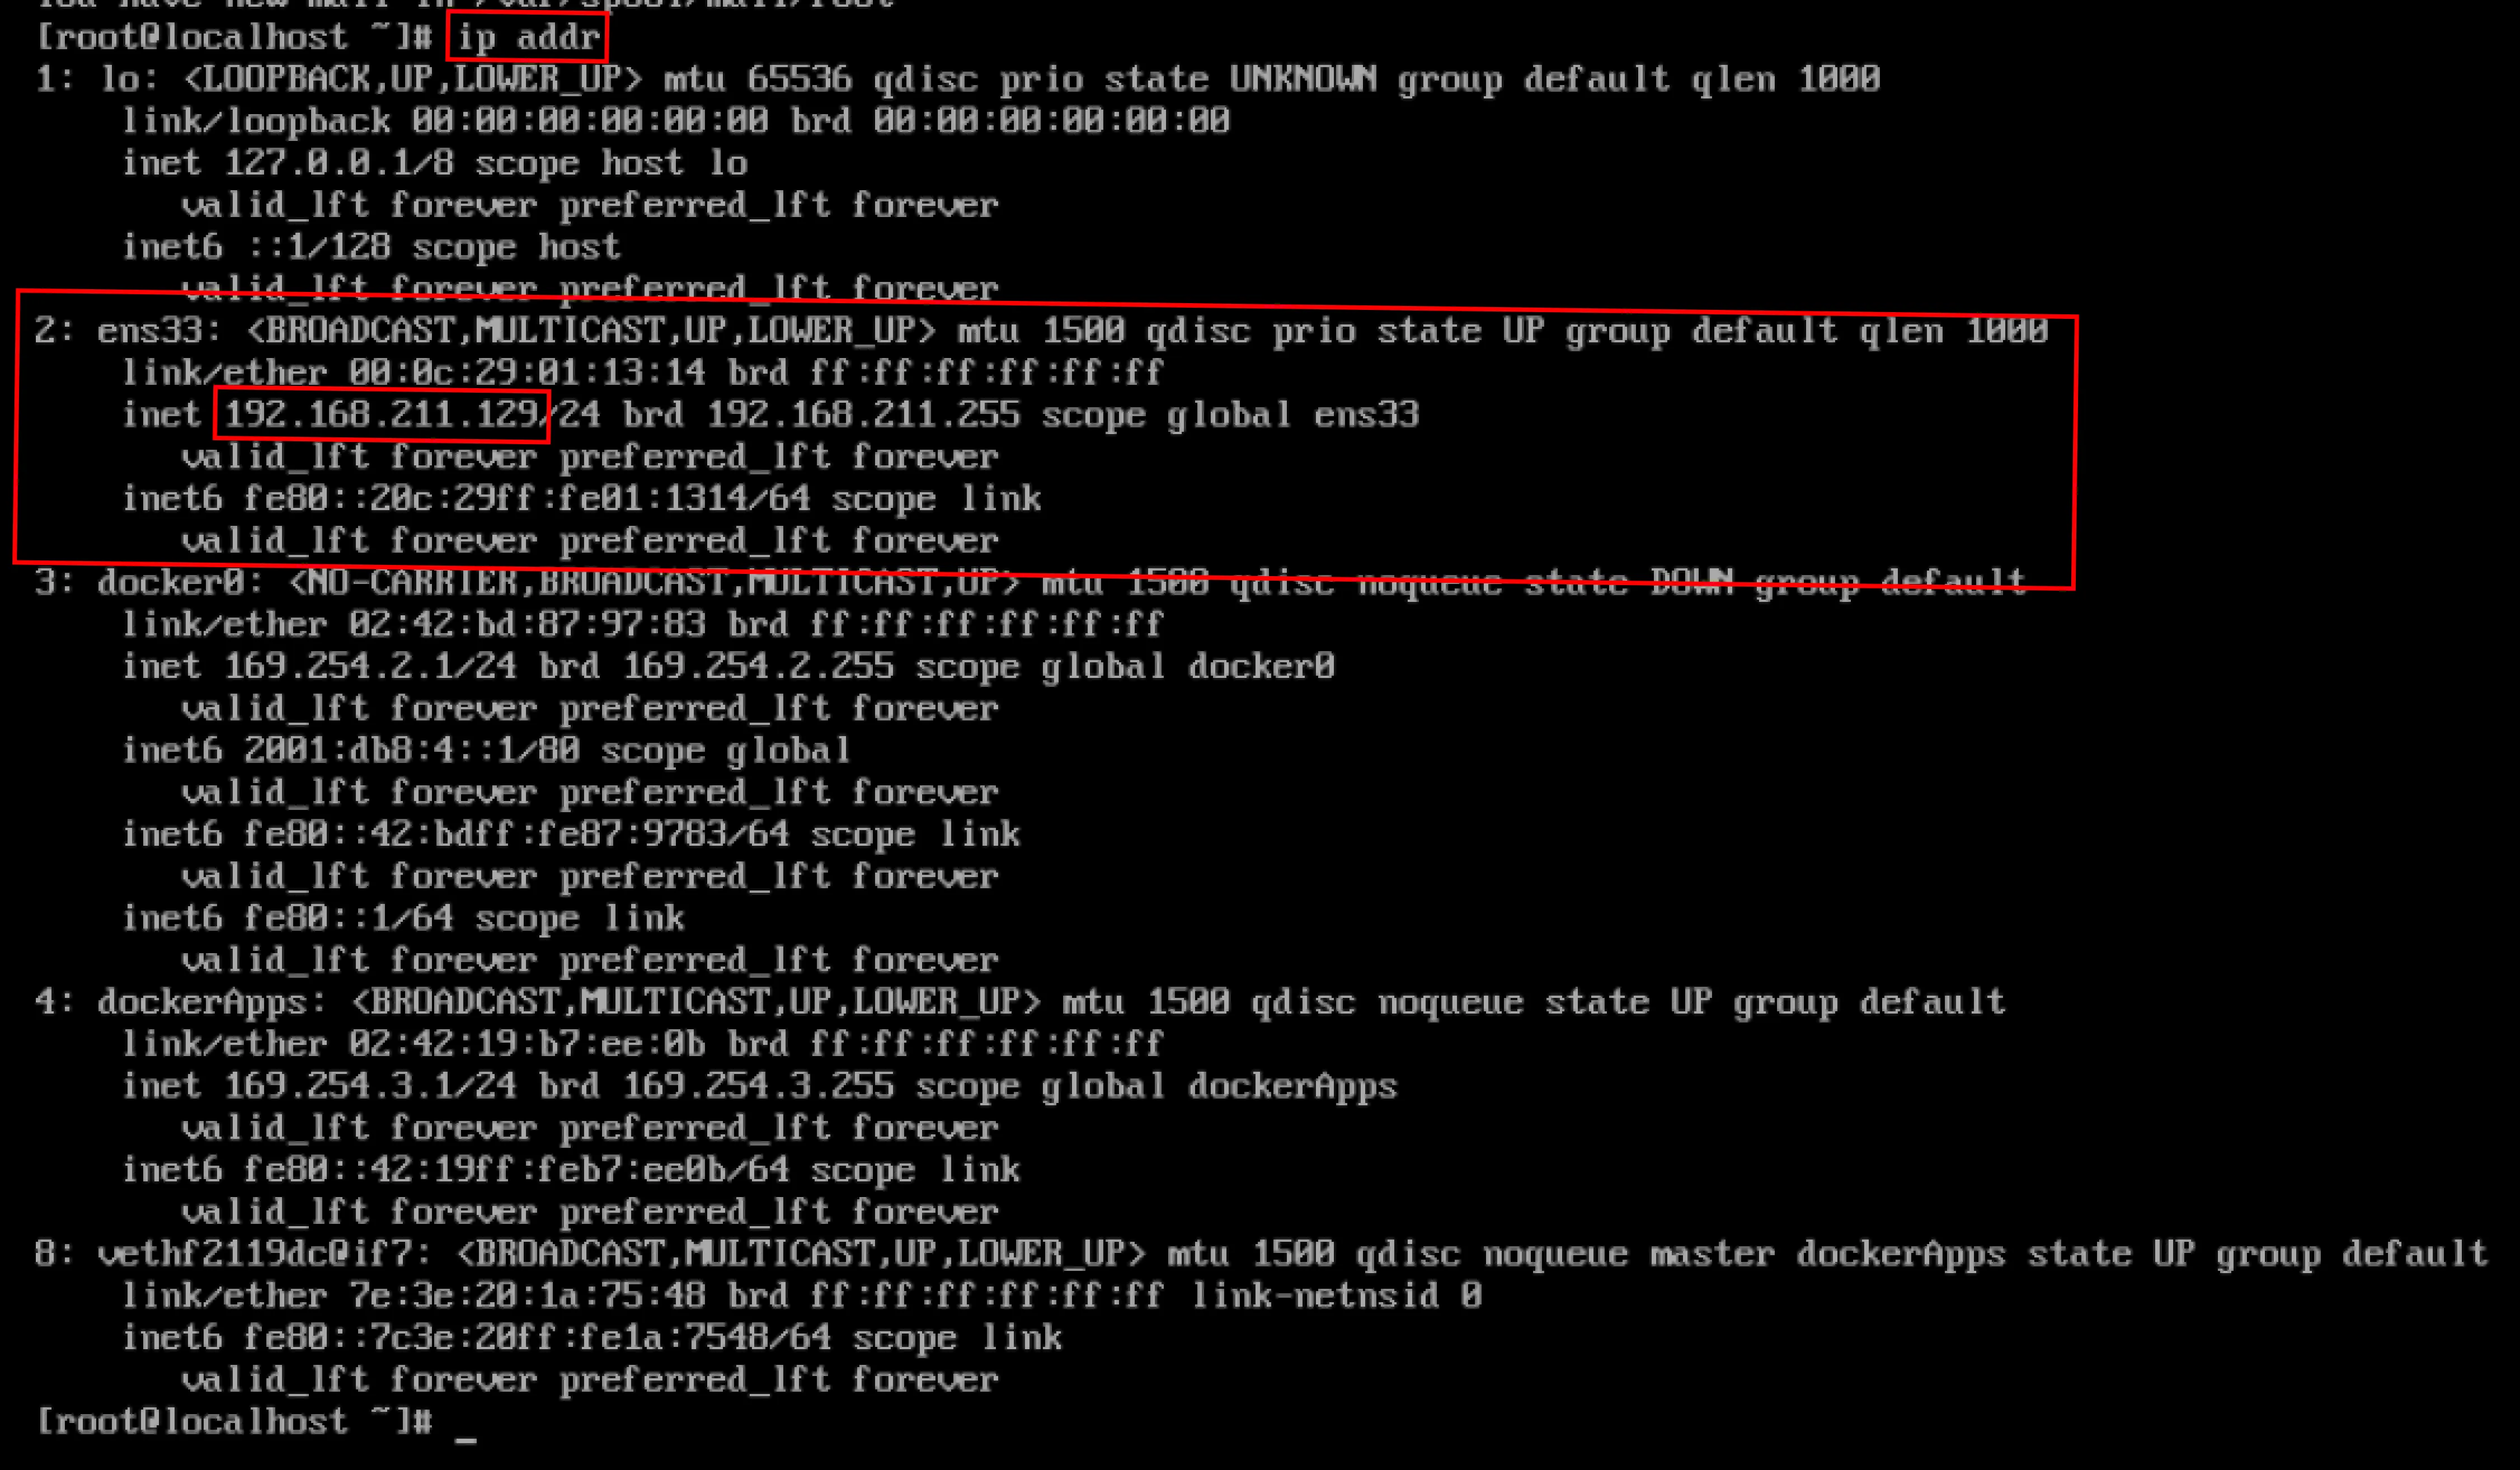 Type ip addr or ip a to see the IP address of the VM